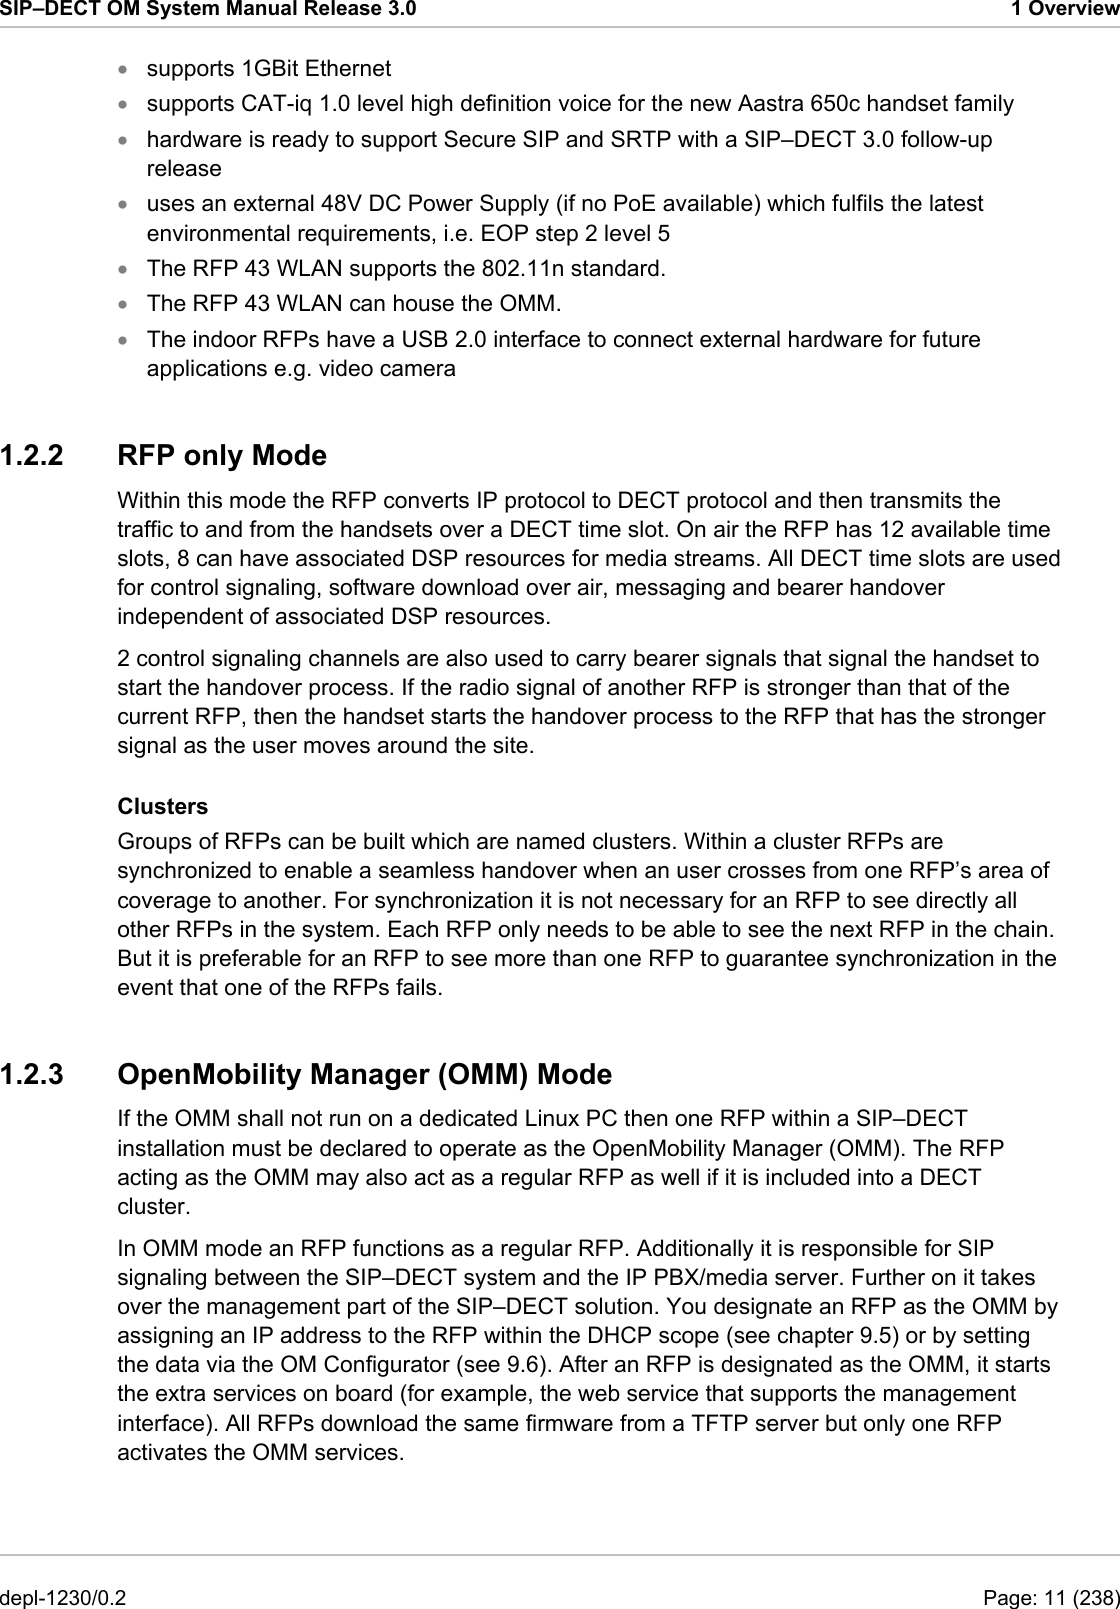 SIP–DECT OM System Manual Release 3.0  1 Overview supports 1GBit Ethernet • • • • • • • supports CAT-iq 1.0 level high definition voice for the new Aastra 650c handset family hardware is ready to support Secure SIP and SRTP with a SIP–DECT 3.0 follow-up release uses an external 48V DC Power Supply (if no PoE available) which fulfils the latest environmental requirements, i.e. EOP step 2 level 5 The RFP 43 WLAN supports the 802.11n standard. The RFP 43 WLAN can house the OMM. The indoor RFPs have a USB 2.0 interface to connect external hardware for future applications e.g. video camera 1.2.2  RFP only Mode Within this mode the RFP converts IP protocol to DECT protocol and then transmits the traffic to and from the handsets over a DECT time slot. On air the RFP has 12 available time slots, 8 can have associated DSP resources for media streams. All DECT time slots are used for control signaling, software download over air, messaging and bearer handover independent of associated DSP resources. 2 control signaling channels are also used to carry bearer signals that signal the handset to start the handover process. If the radio signal of another RFP is stronger than that of the current RFP, then the handset starts the handover process to the RFP that has the stronger signal as the user moves around the site. Clusters Groups of RFPs can be built which are named clusters. Within a cluster RFPs are synchronized to enable a seamless handover when an user crosses from one RFP’s area of coverage to another. For synchronization it is not necessary for an RFP to see directly all other RFPs in the system. Each RFP only needs to be able to see the next RFP in the chain. But it is preferable for an RFP to see more than one RFP to guarantee synchronization in the event that one of the RFPs fails.  1.2.3  OpenMobility Manager (OMM) Mode  If the OMM shall not run on a dedicated Linux PC then one RFP within a SIP–DECT installation must be declared to operate as the OpenMobility Manager (OMM). The RFP acting as the OMM may also act as a regular RFP as well if it is included into a DECT cluster.  In OMM mode an RFP functions as a regular RFP. Additionally it is responsible for SIP signaling between the SIP–DECT system and the IP PBX/media server. Further on it takes over the management part of the SIP–DECT solution. You designate an RFP as the OMM by assigning an IP address to the RFP within the DHCP scope (see chapter 9.5) or by setting the data via the OM Configurator (see 9.6). After an RFP is designated as the OMM, it starts the extra services on board (for example, the web service that supports the management interface). All RFPs download the same firmware from a TFTP server but only one RFP activates the OMM services.  depl-1230/0.2  Page: 11 (238) 